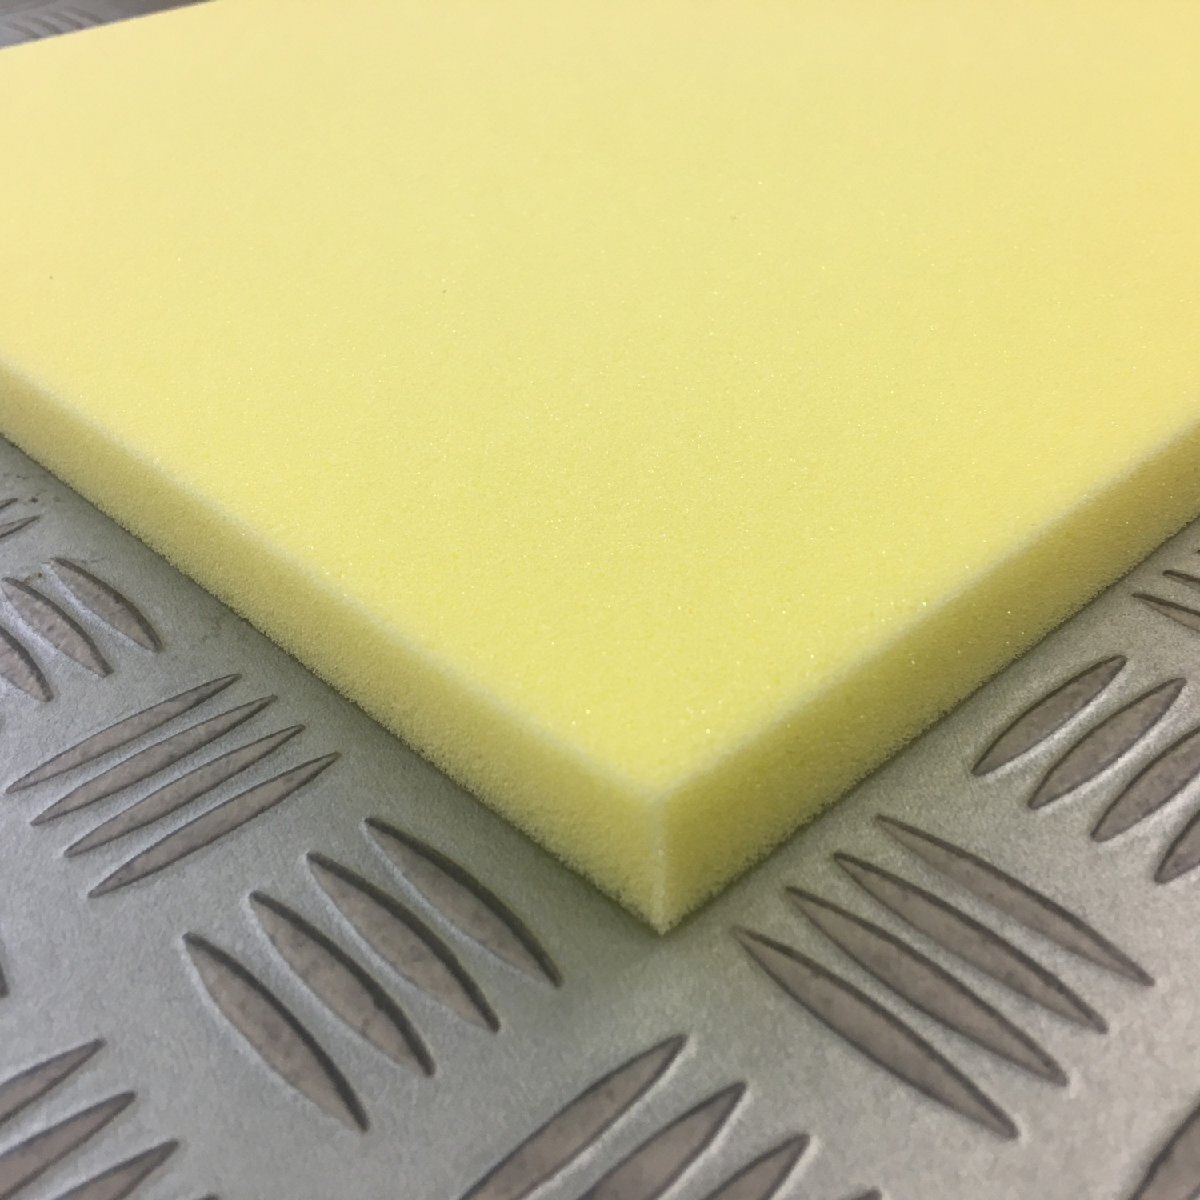  urethane foam [EX-15mm thickness ] hardness hard firmly width 1200x length 2000mm sponge / mat / seat repair / sleeping area in the vehicle for bed / camper 